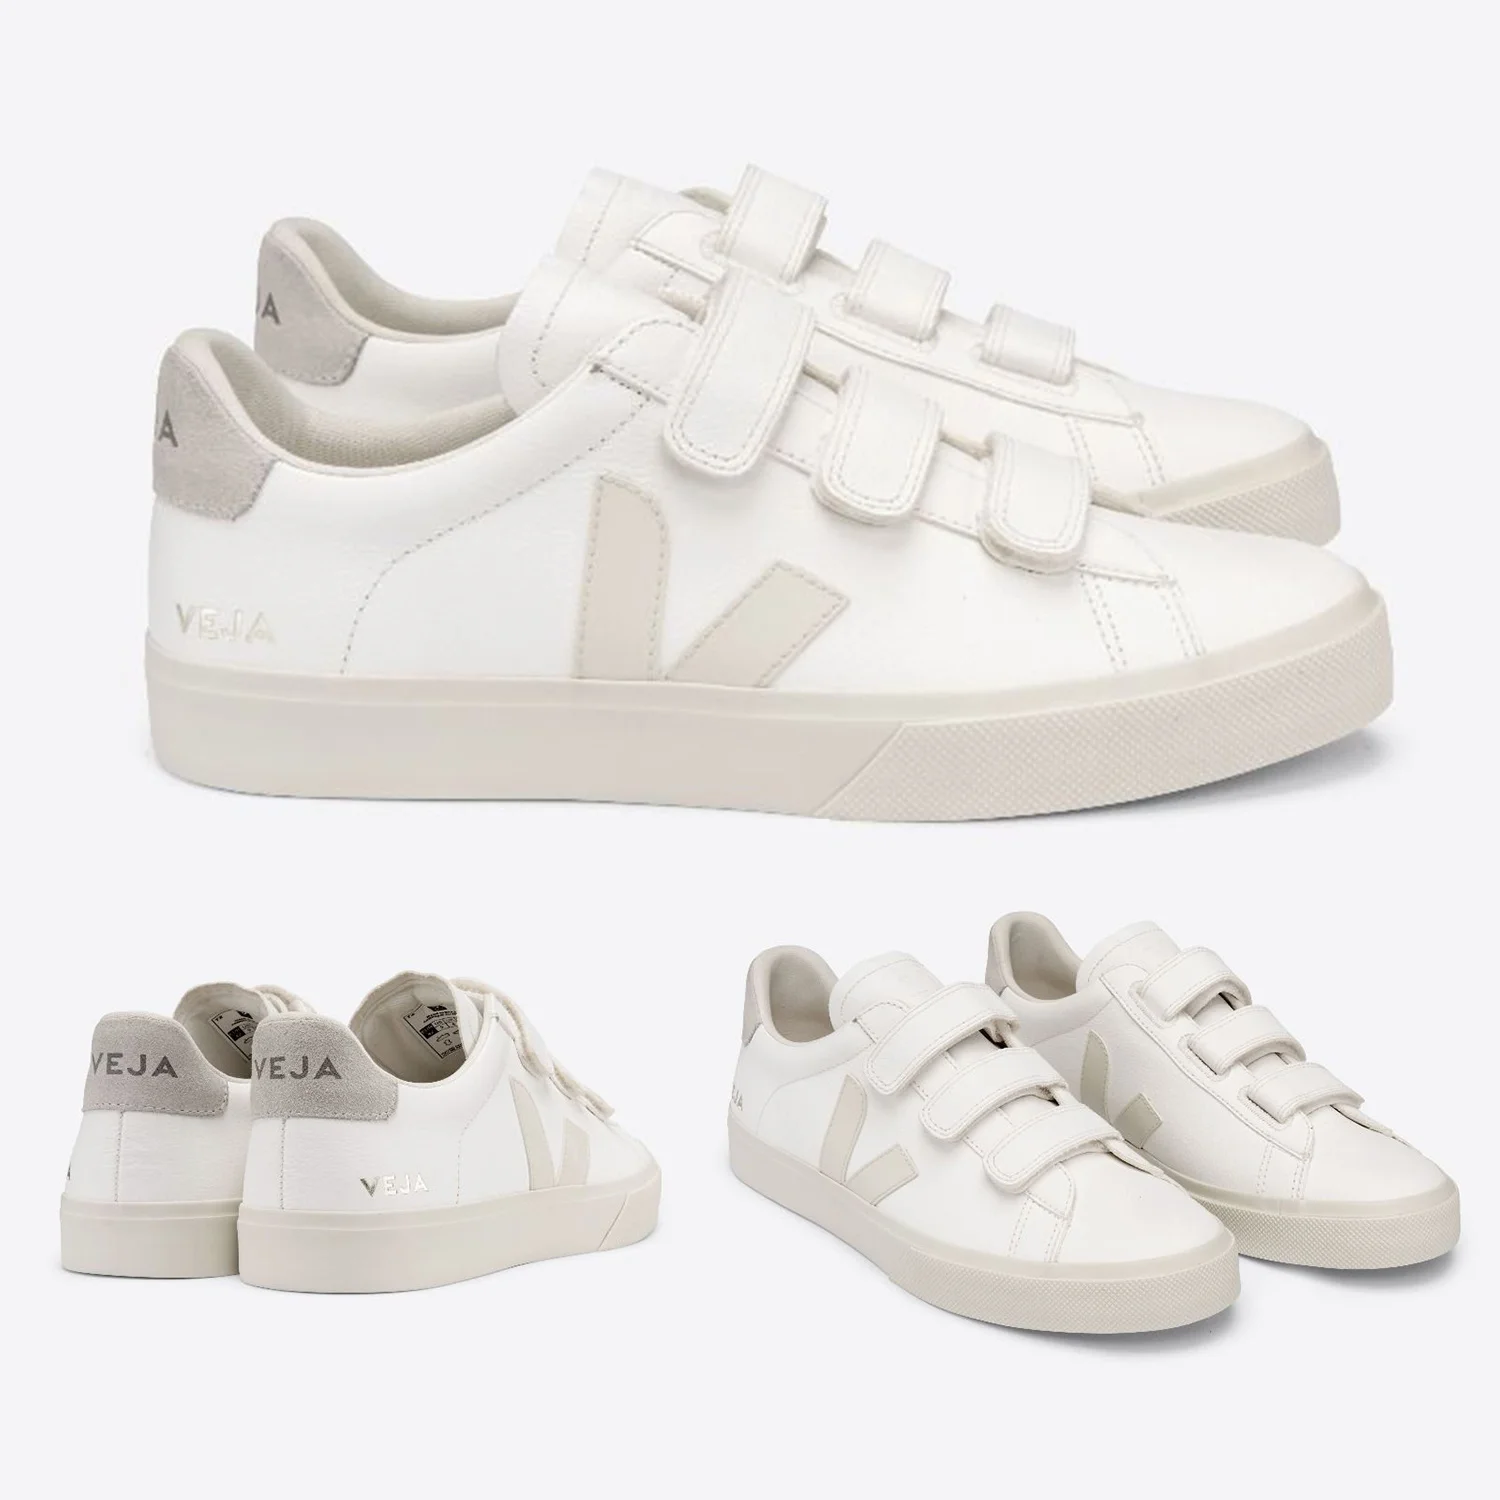 

Hot Original Veja Campo Women Sneakers Men Classic White Shoes Unisex Fashion Classic V-LOCK Velcro Leather New Style Size 35-45